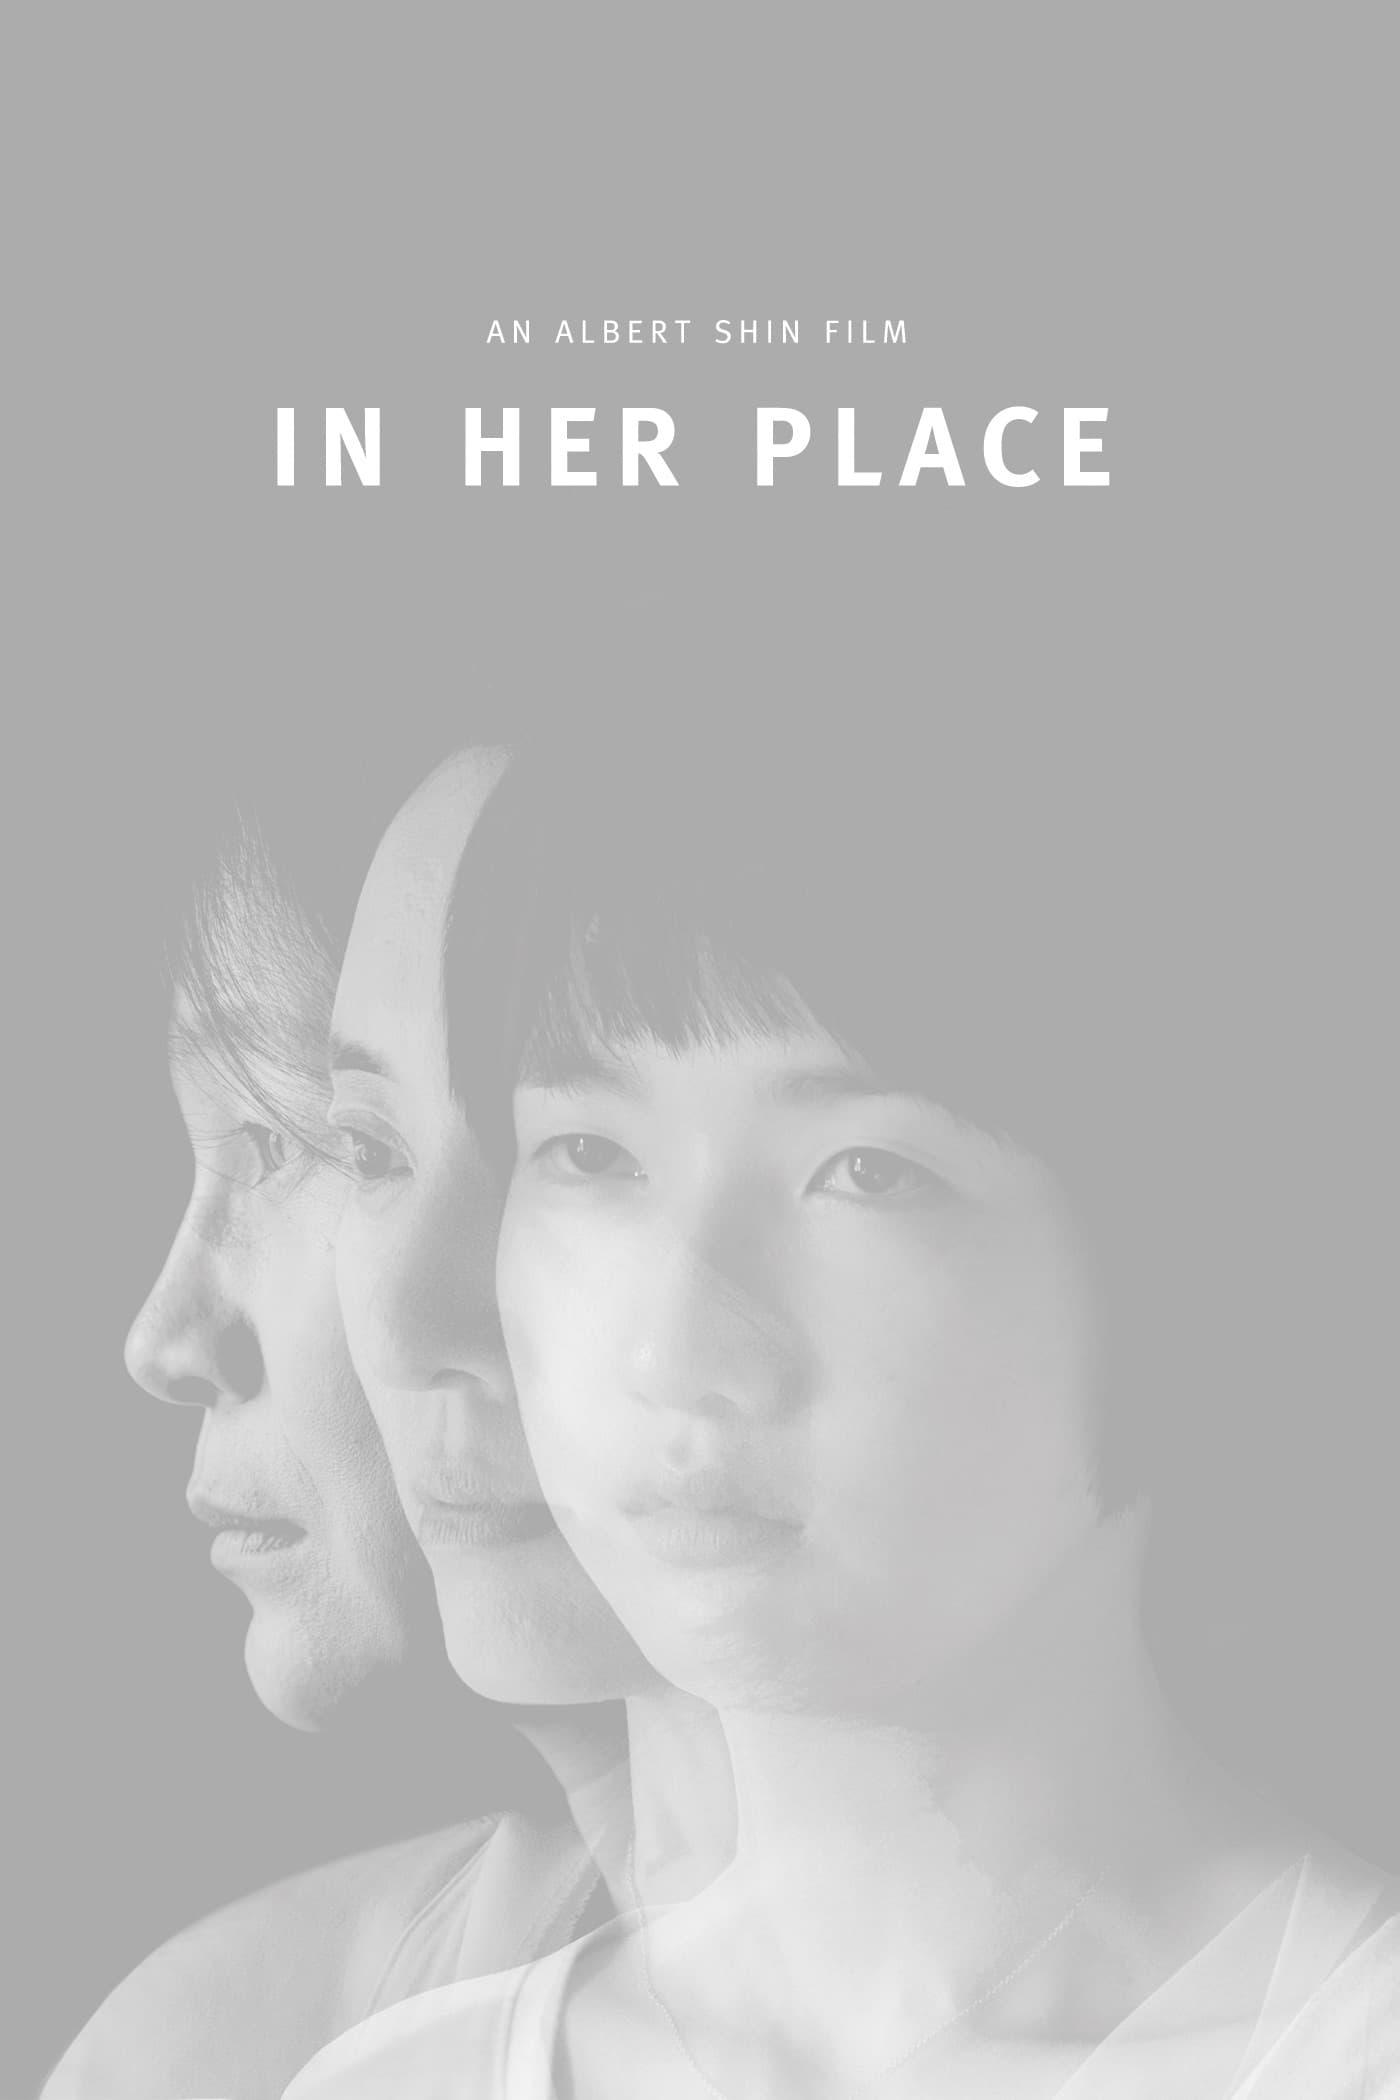 In Her Place poster